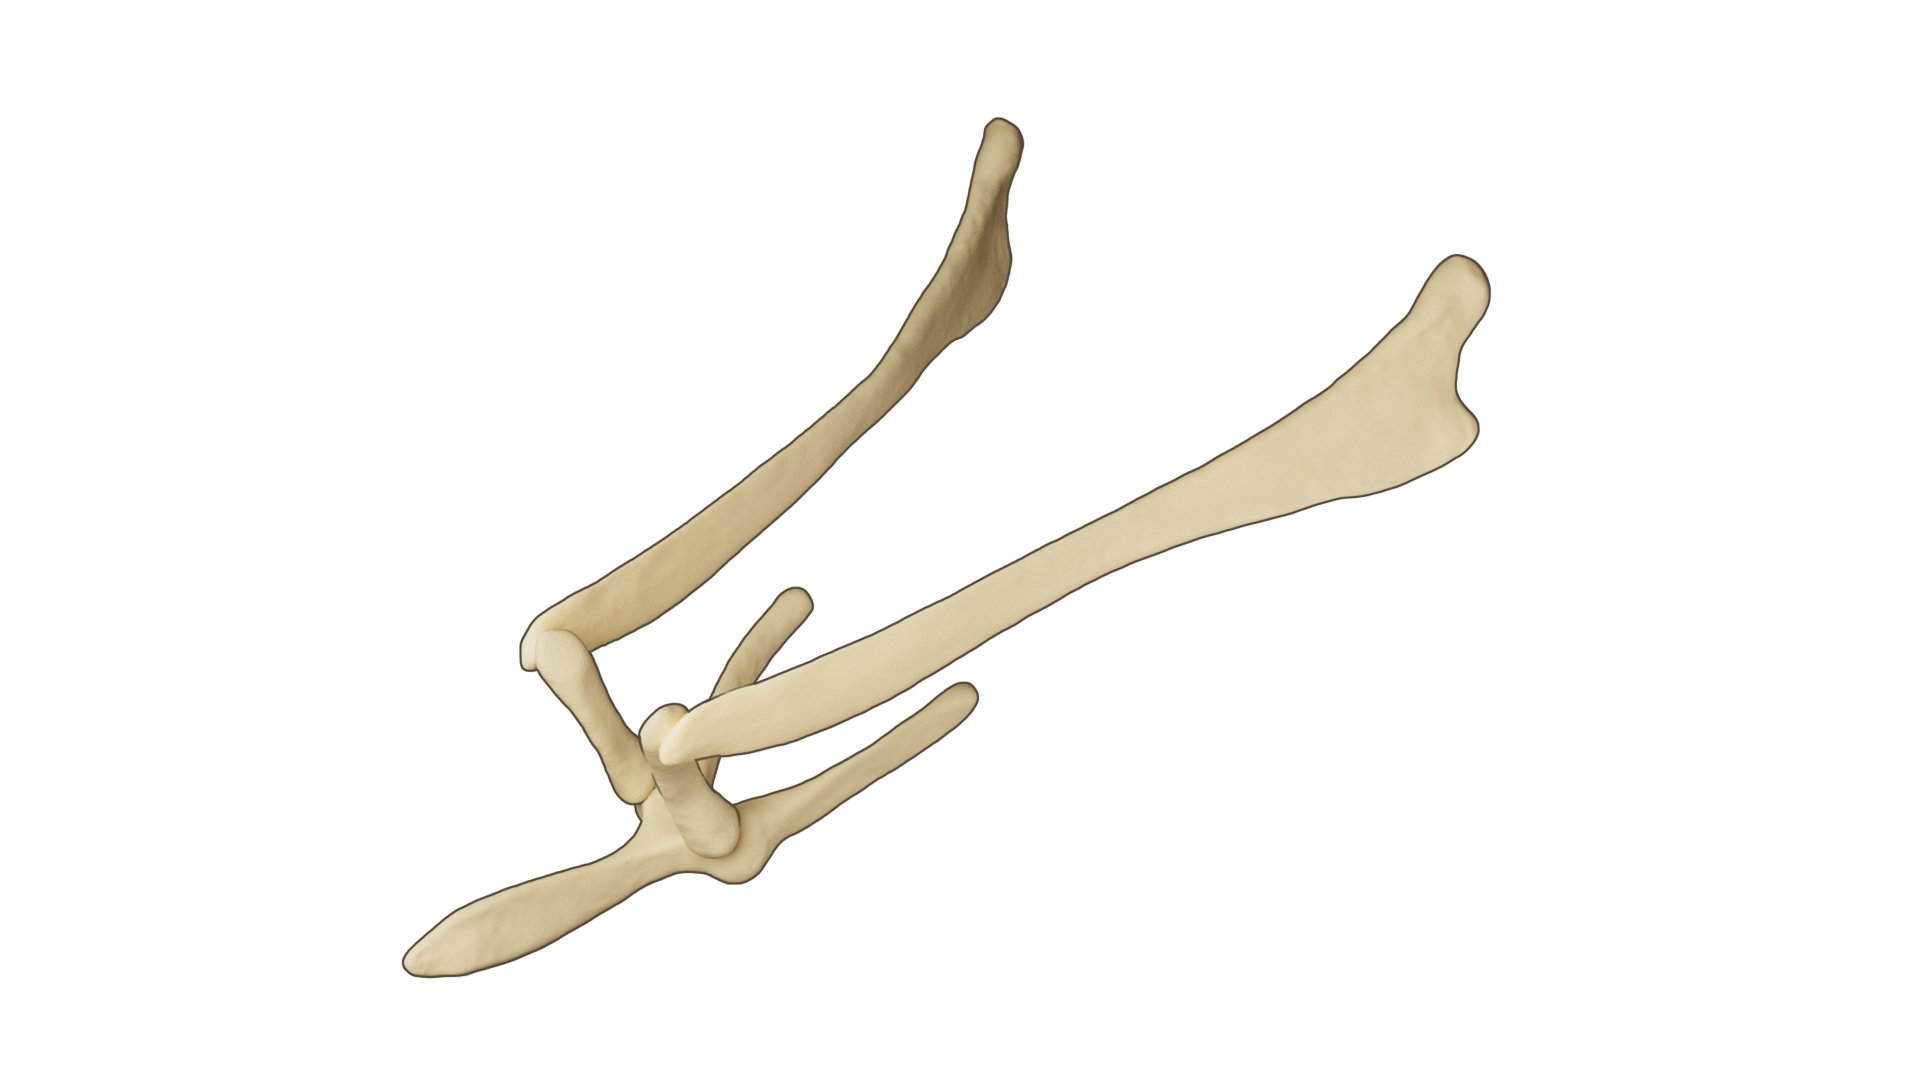 3D model of a horse hyoid apparatus